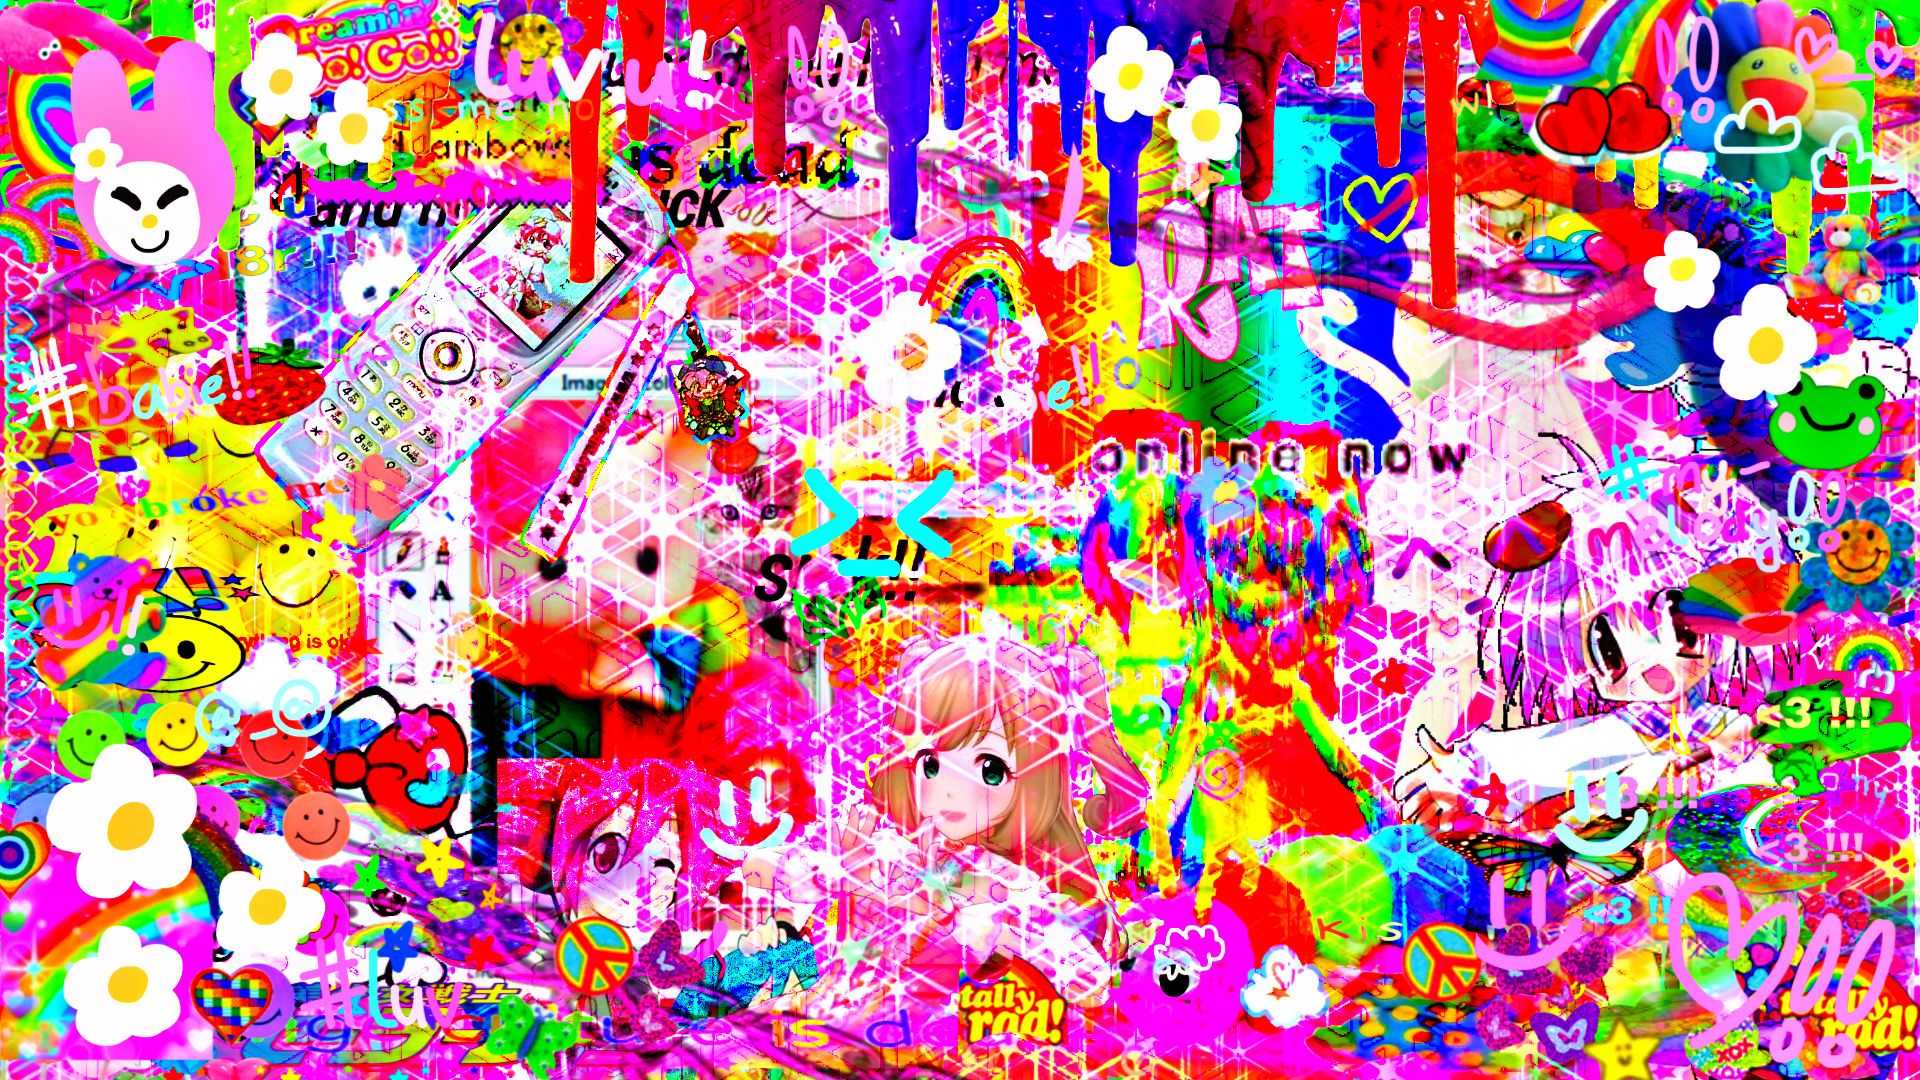 WEIRDCORE WALLPAPERS in 2022 Hippie painting Diy canvas art Art collage  wall Wallpaper Download  MOONAZ